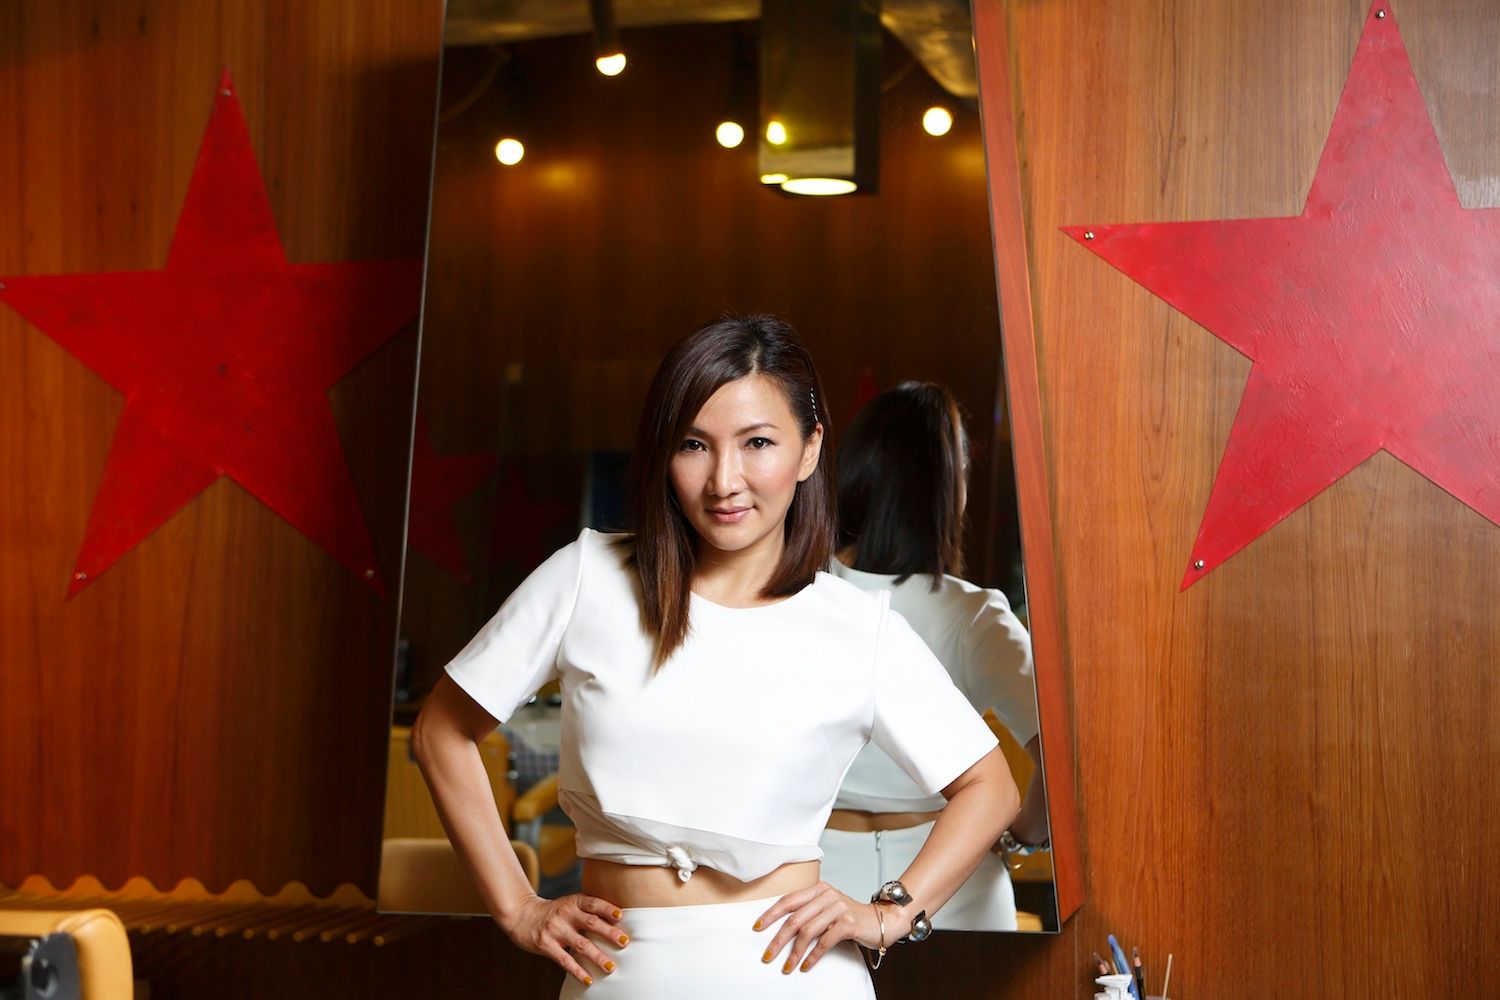 Talking wines and wellness with Cynthia Chua